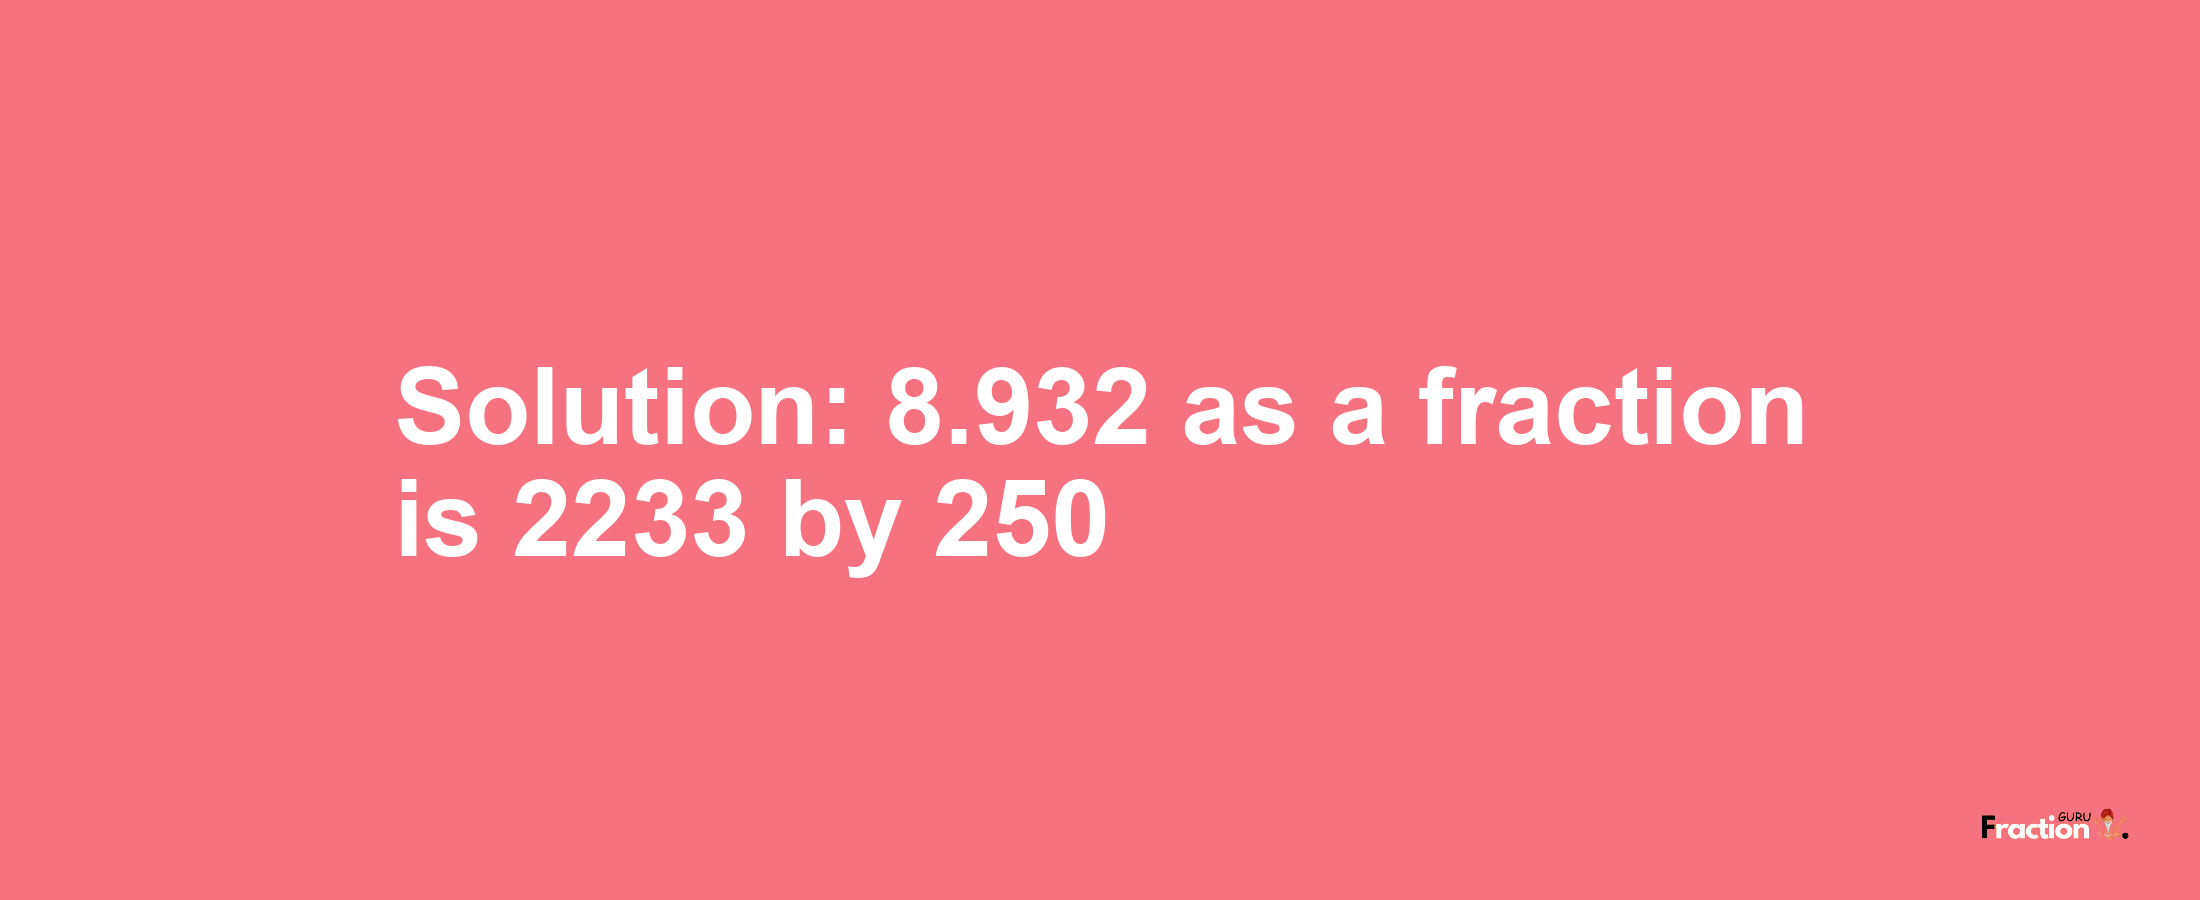 Solution:8.932 as a fraction is 2233/250